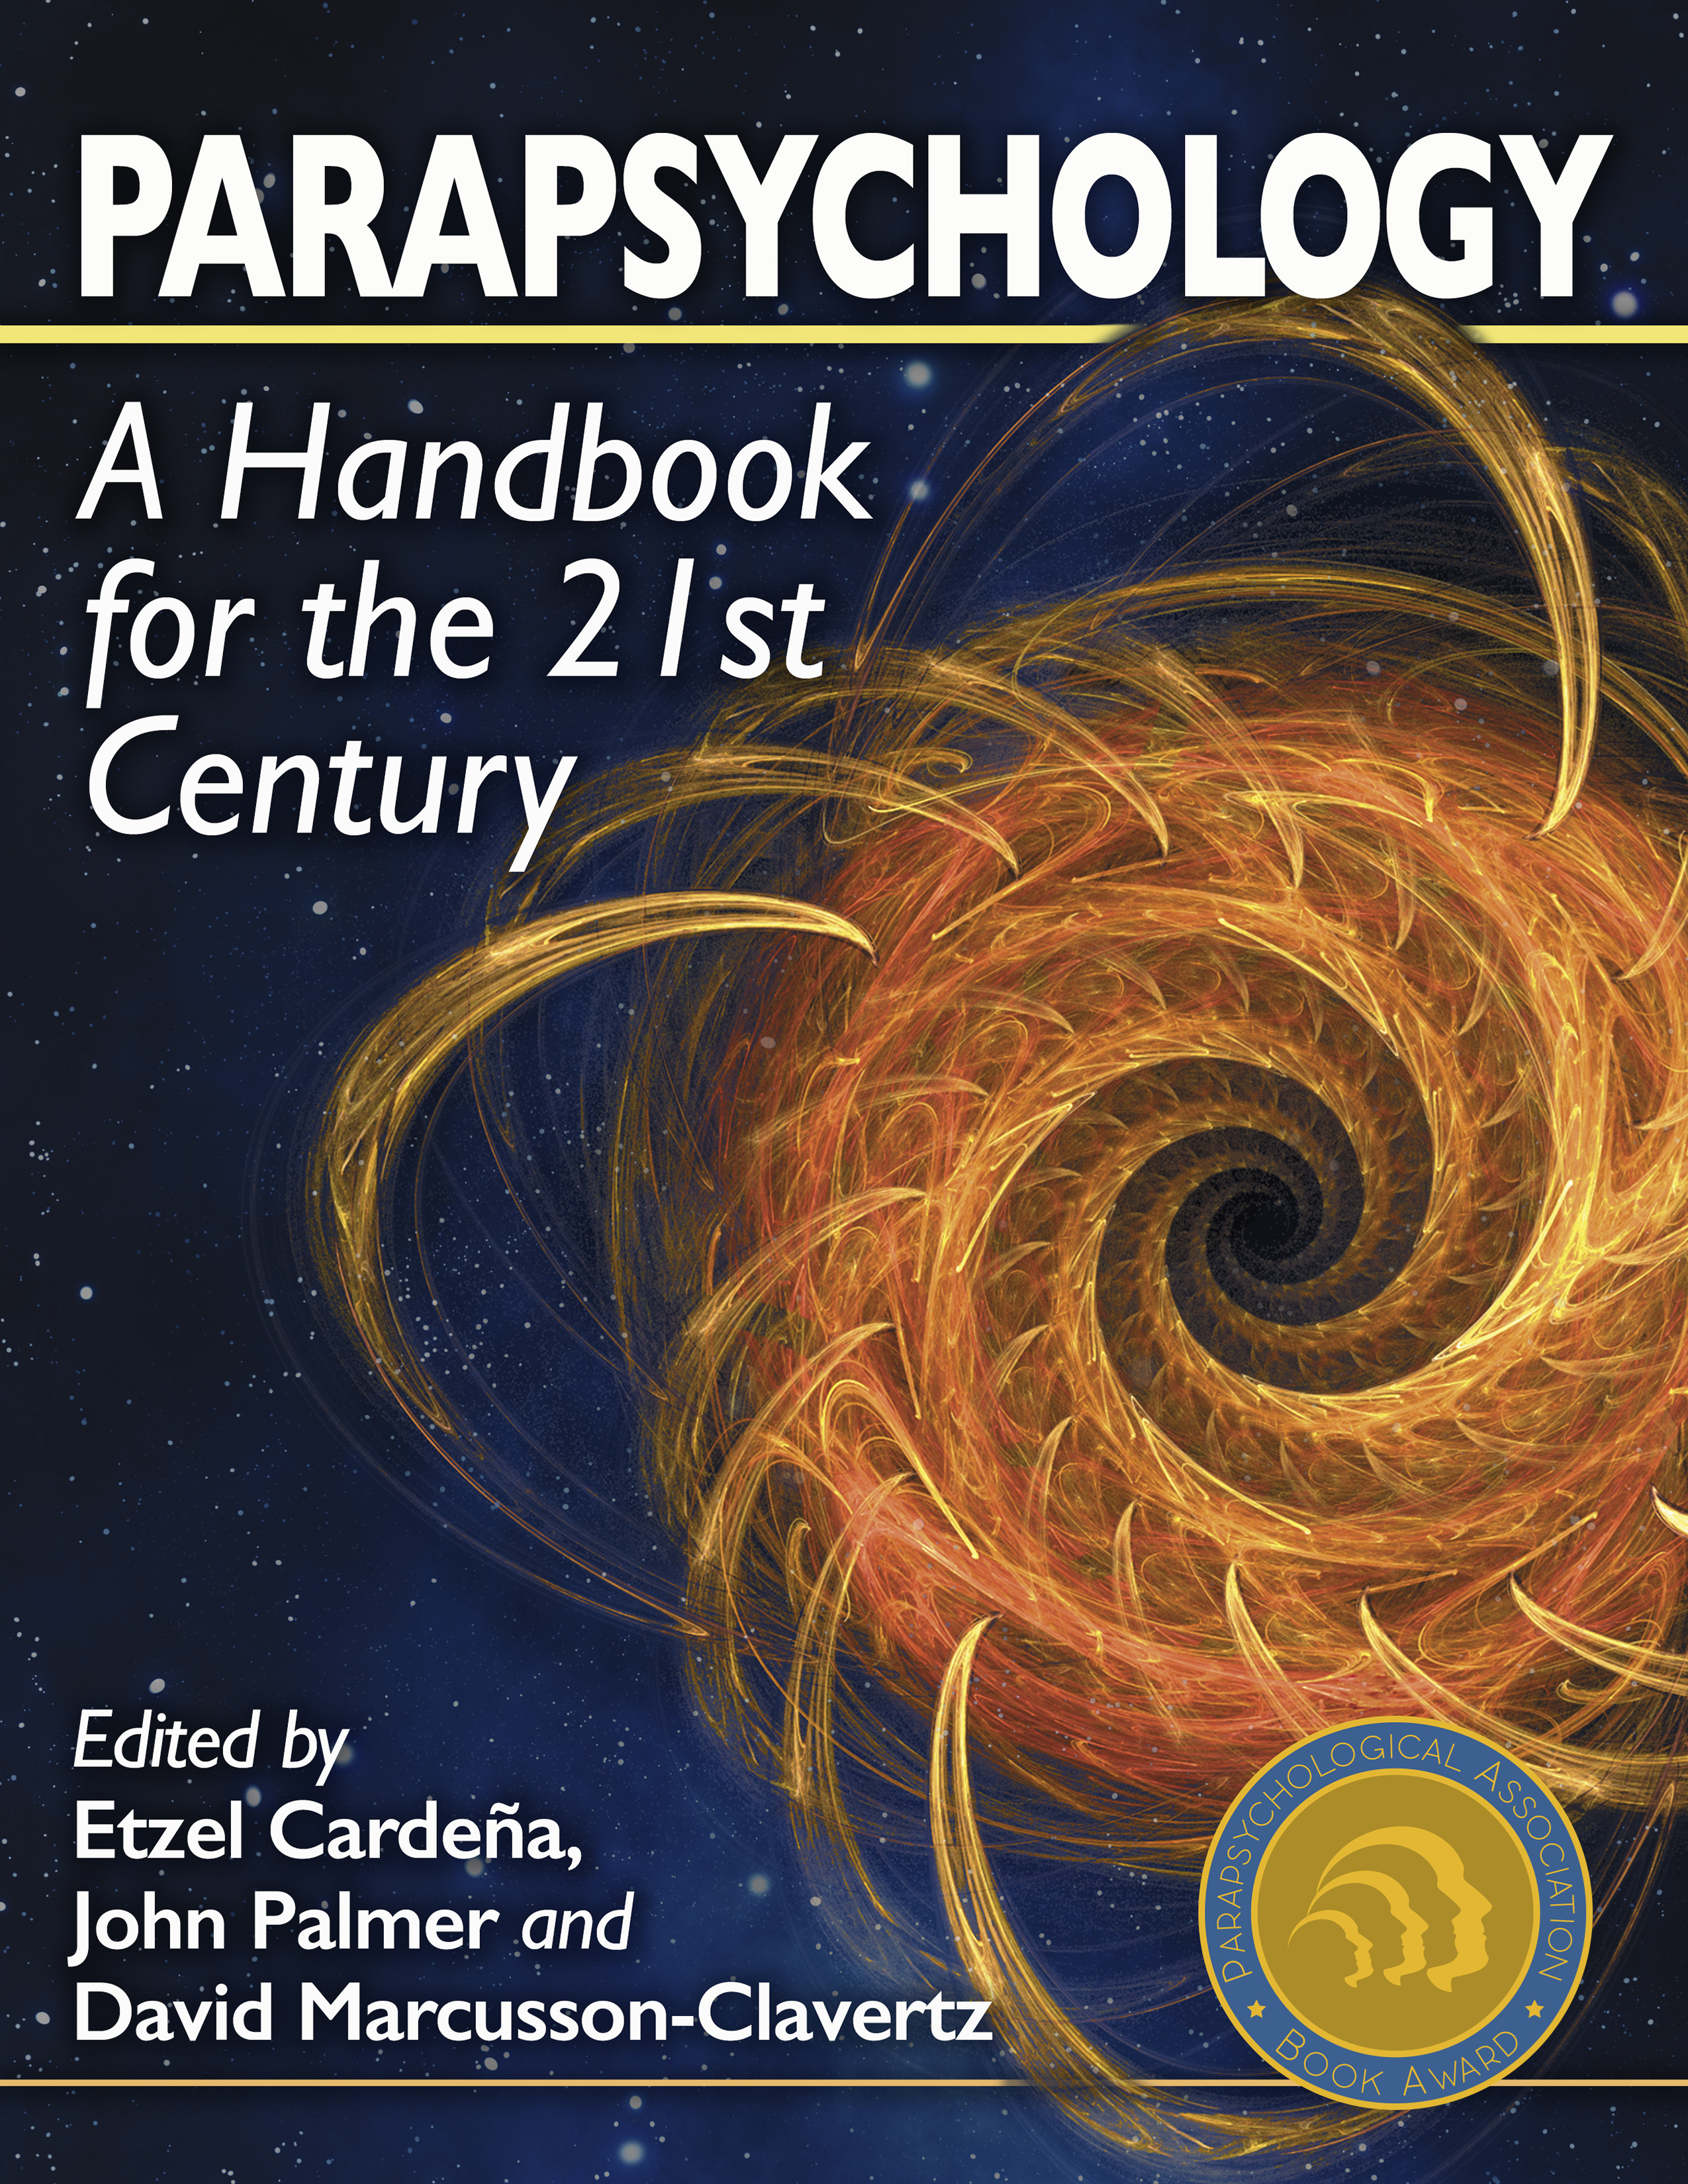 Parapsychology A Handbook for the 21st Century - image 1